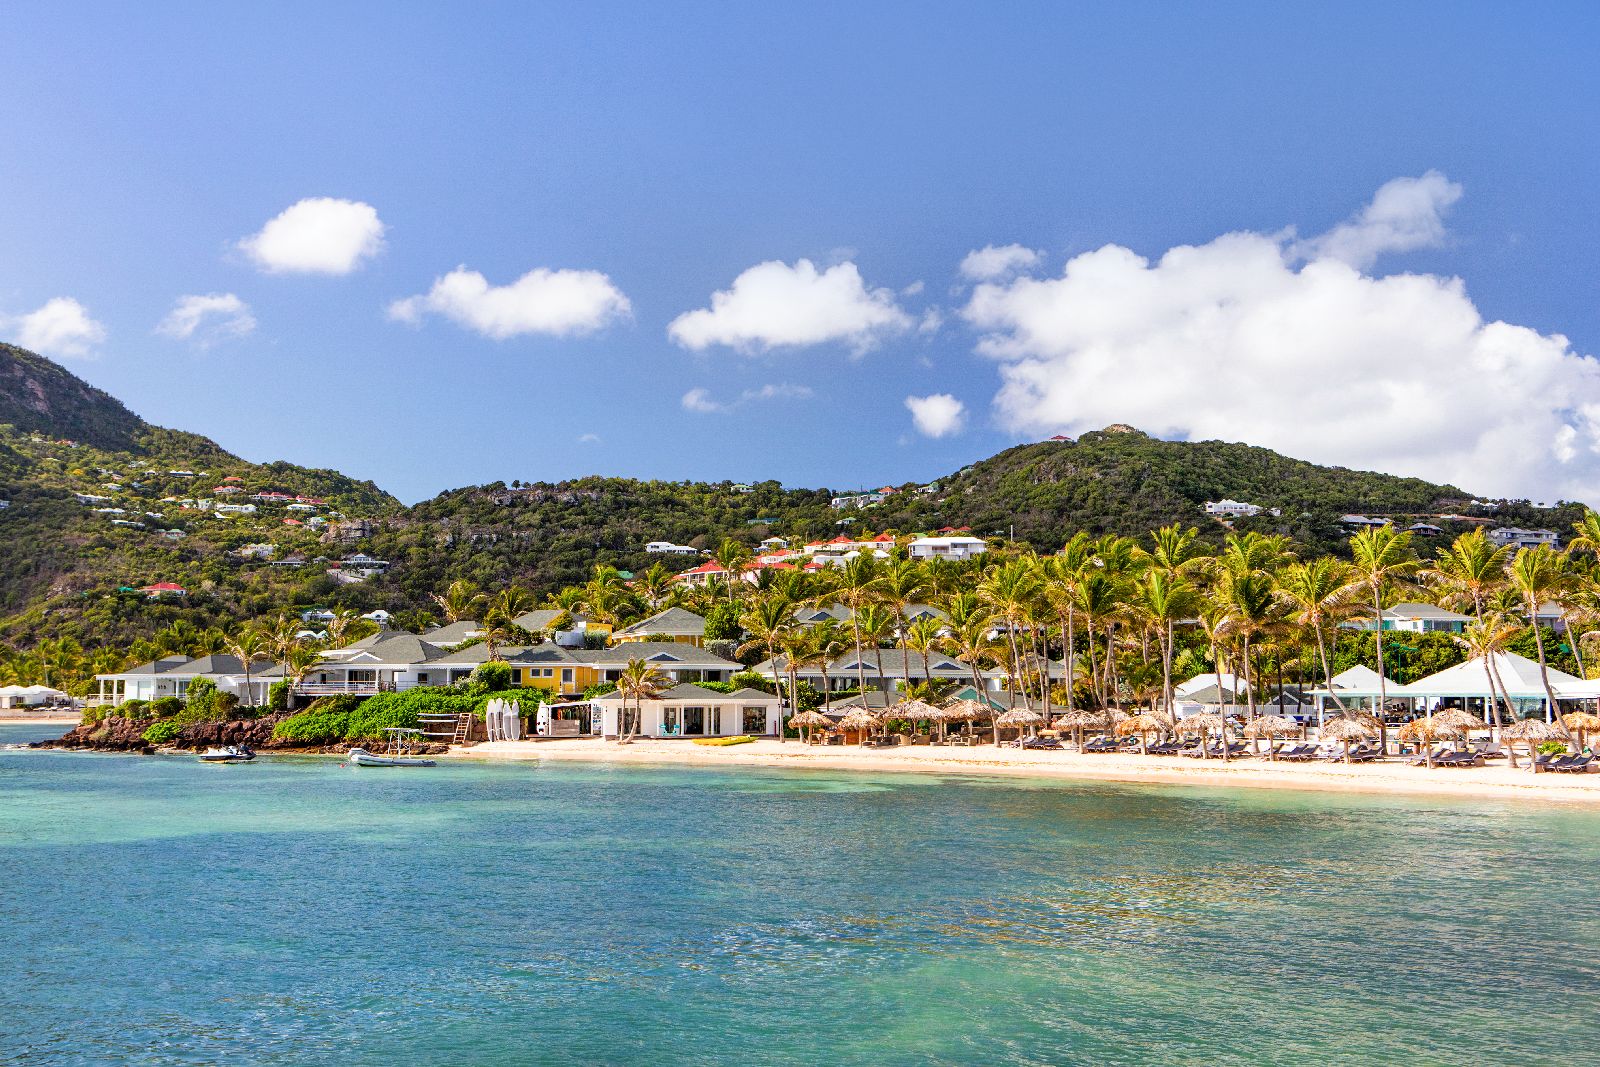 View of Rosewood Le Guanahani St Barths and the lagoon